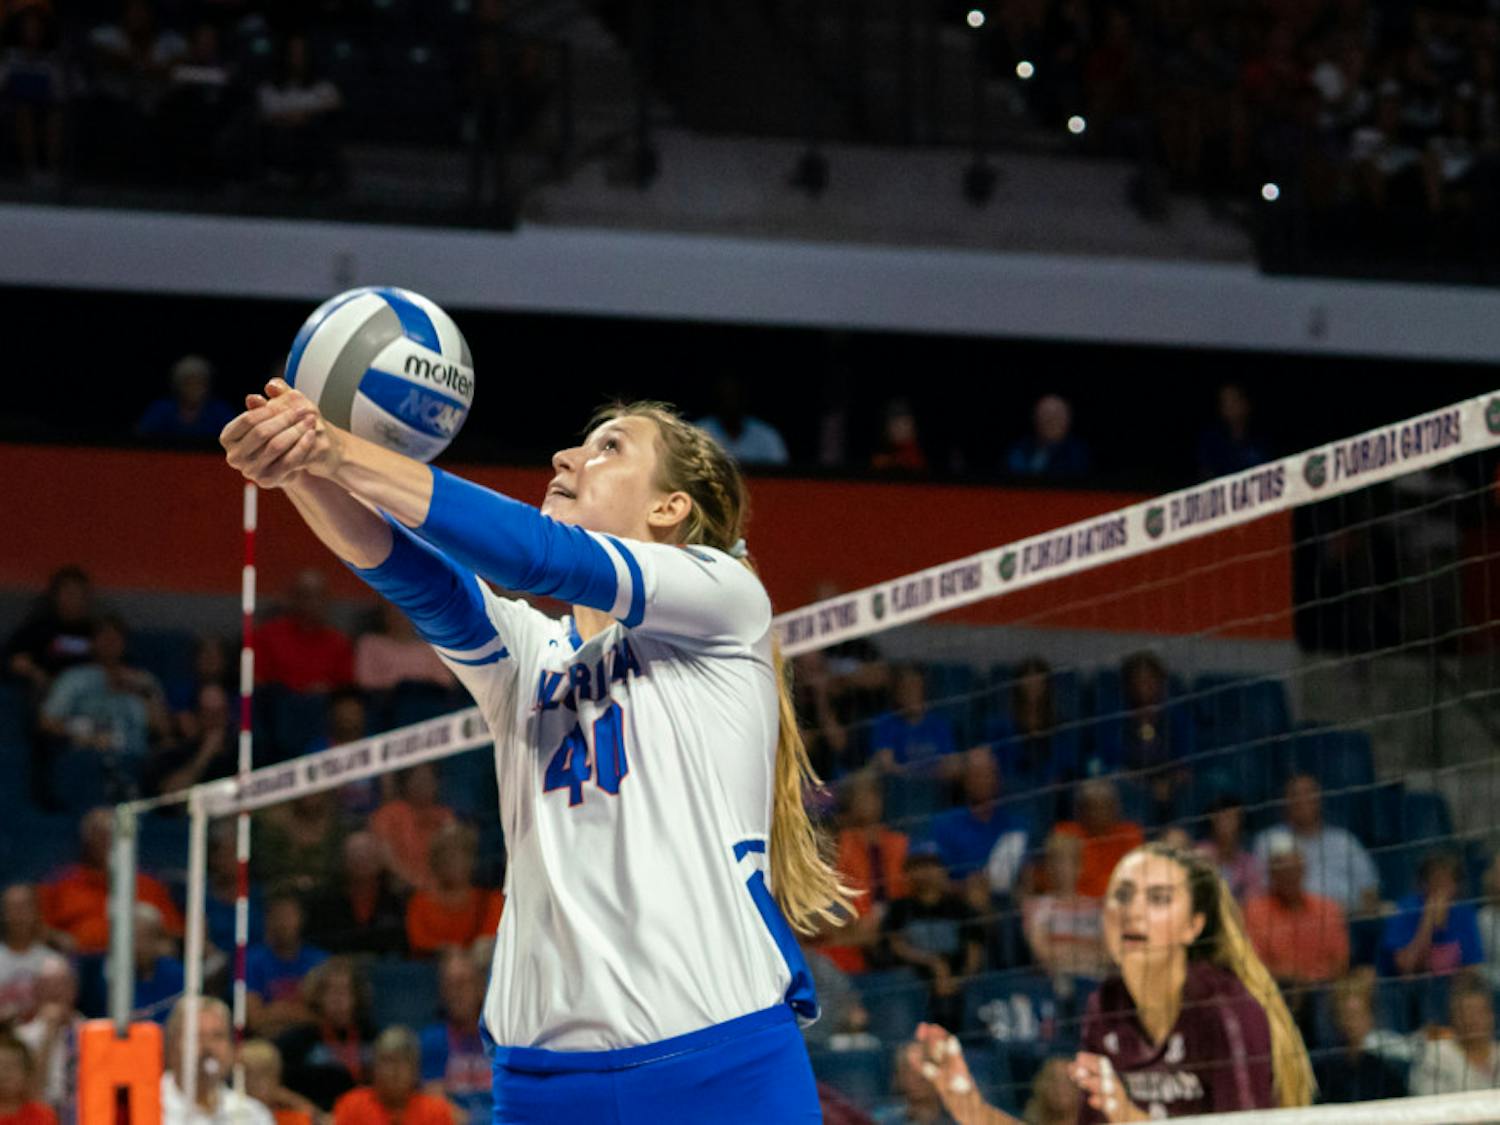 Sophomore setter Holly Carlton recorded a team-high nine kills on 17 attacks in Sunday afternoon’s win against Alabama. The 6-foot-7 Carlton also set a career-high with four service aces.